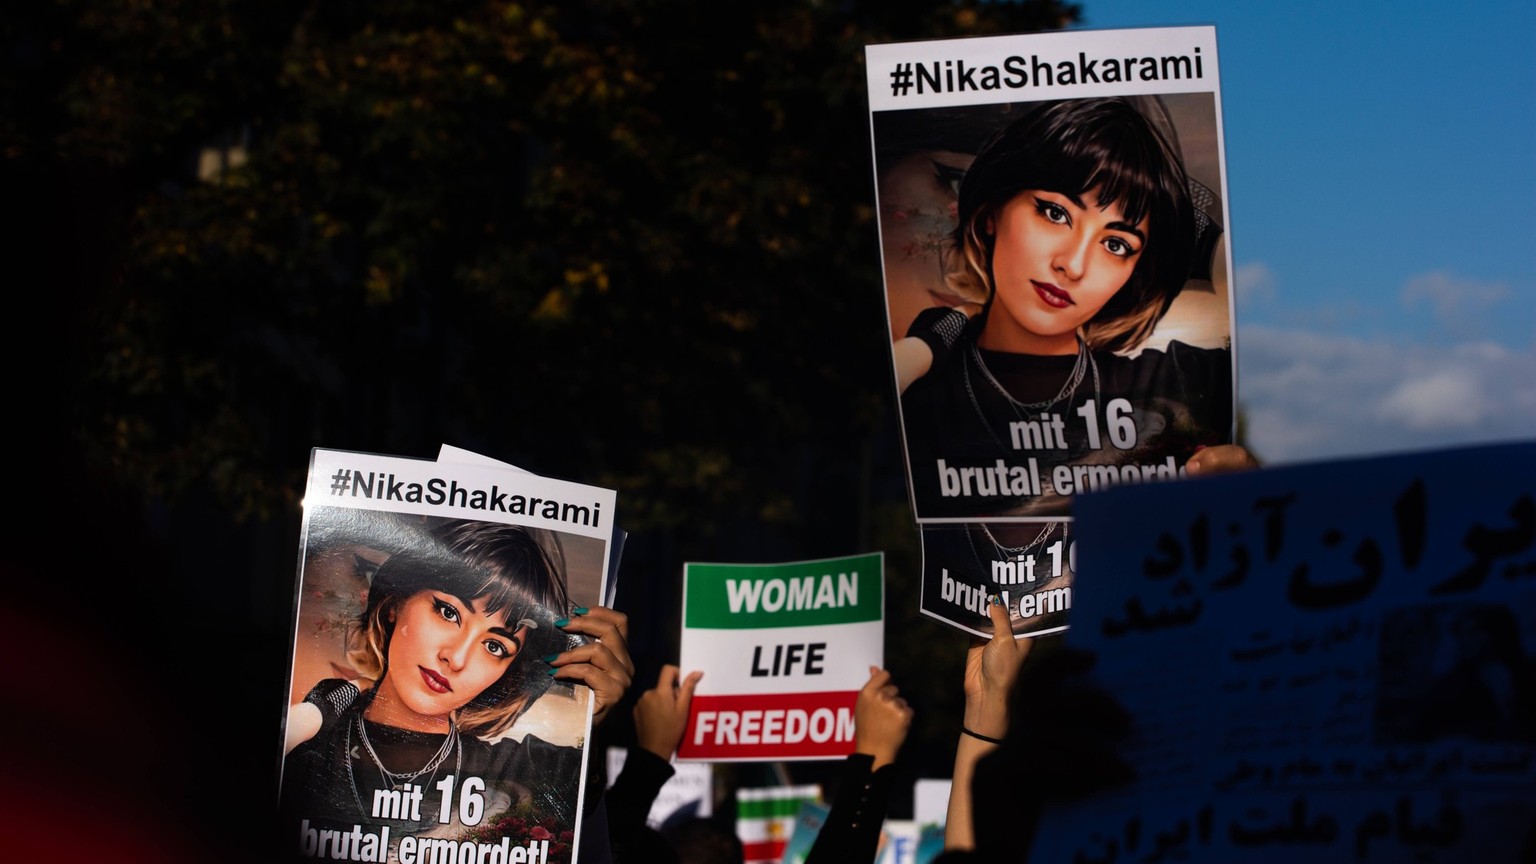 Women Rights Demo In Dusseldorf pictures of Nika Shakarami , a 16 years old Iranian girl was killed during protest, are seen during the women, life, liberty protest in Duesseldorf, Germany on Oct 8, 2 ...